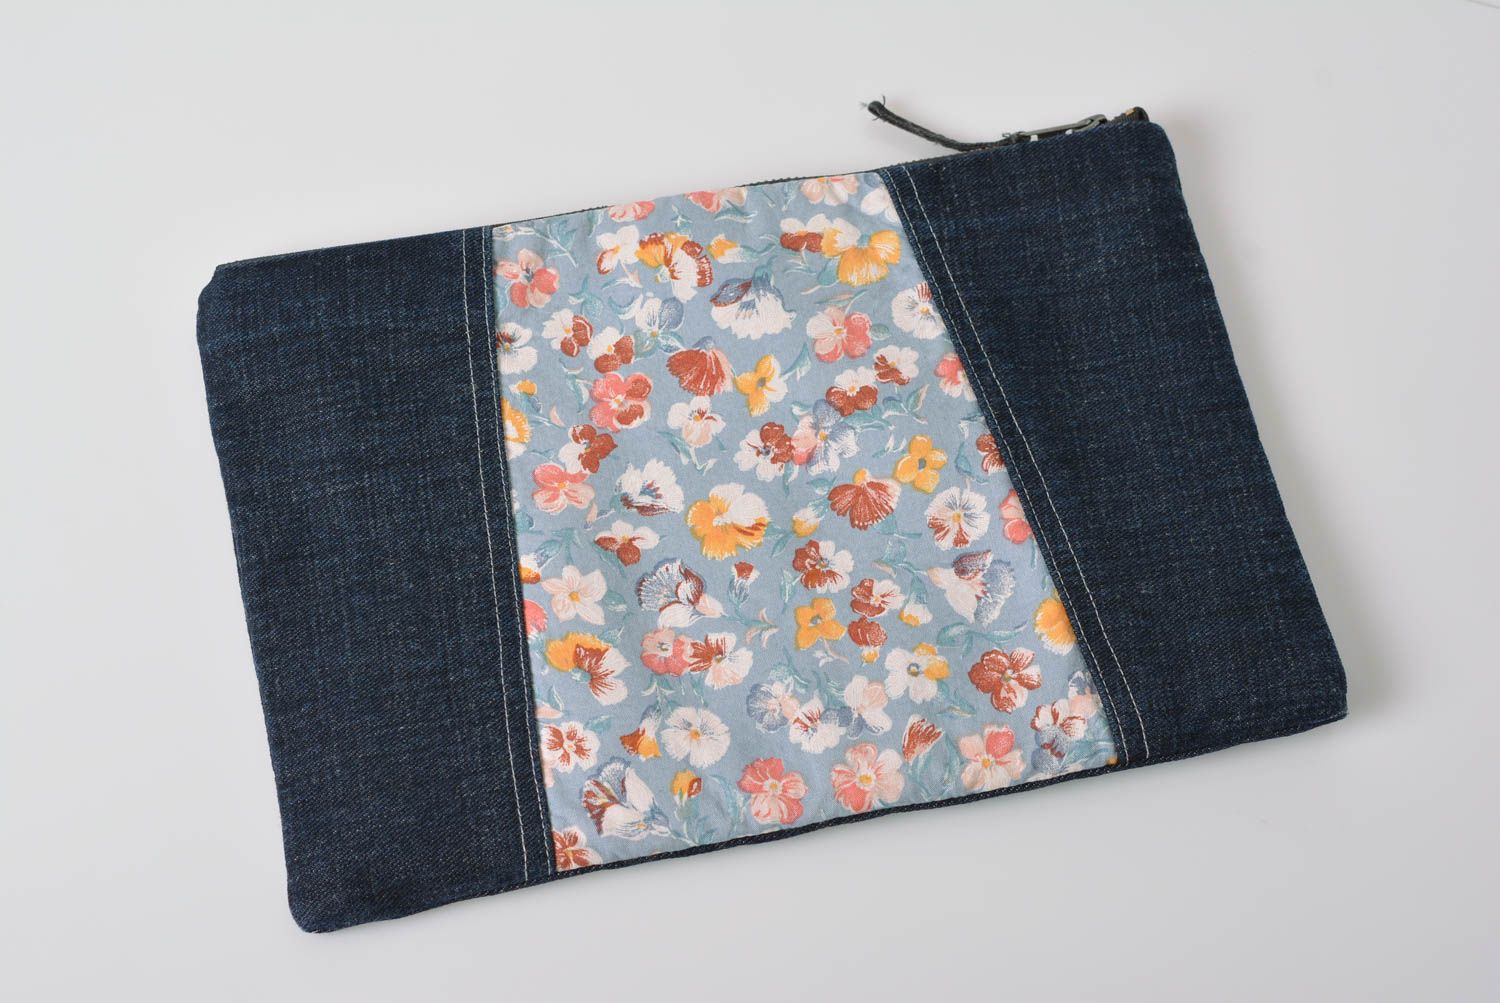 Small clutch bag made of denim with cotton insert and zipper ladies purse photo 1